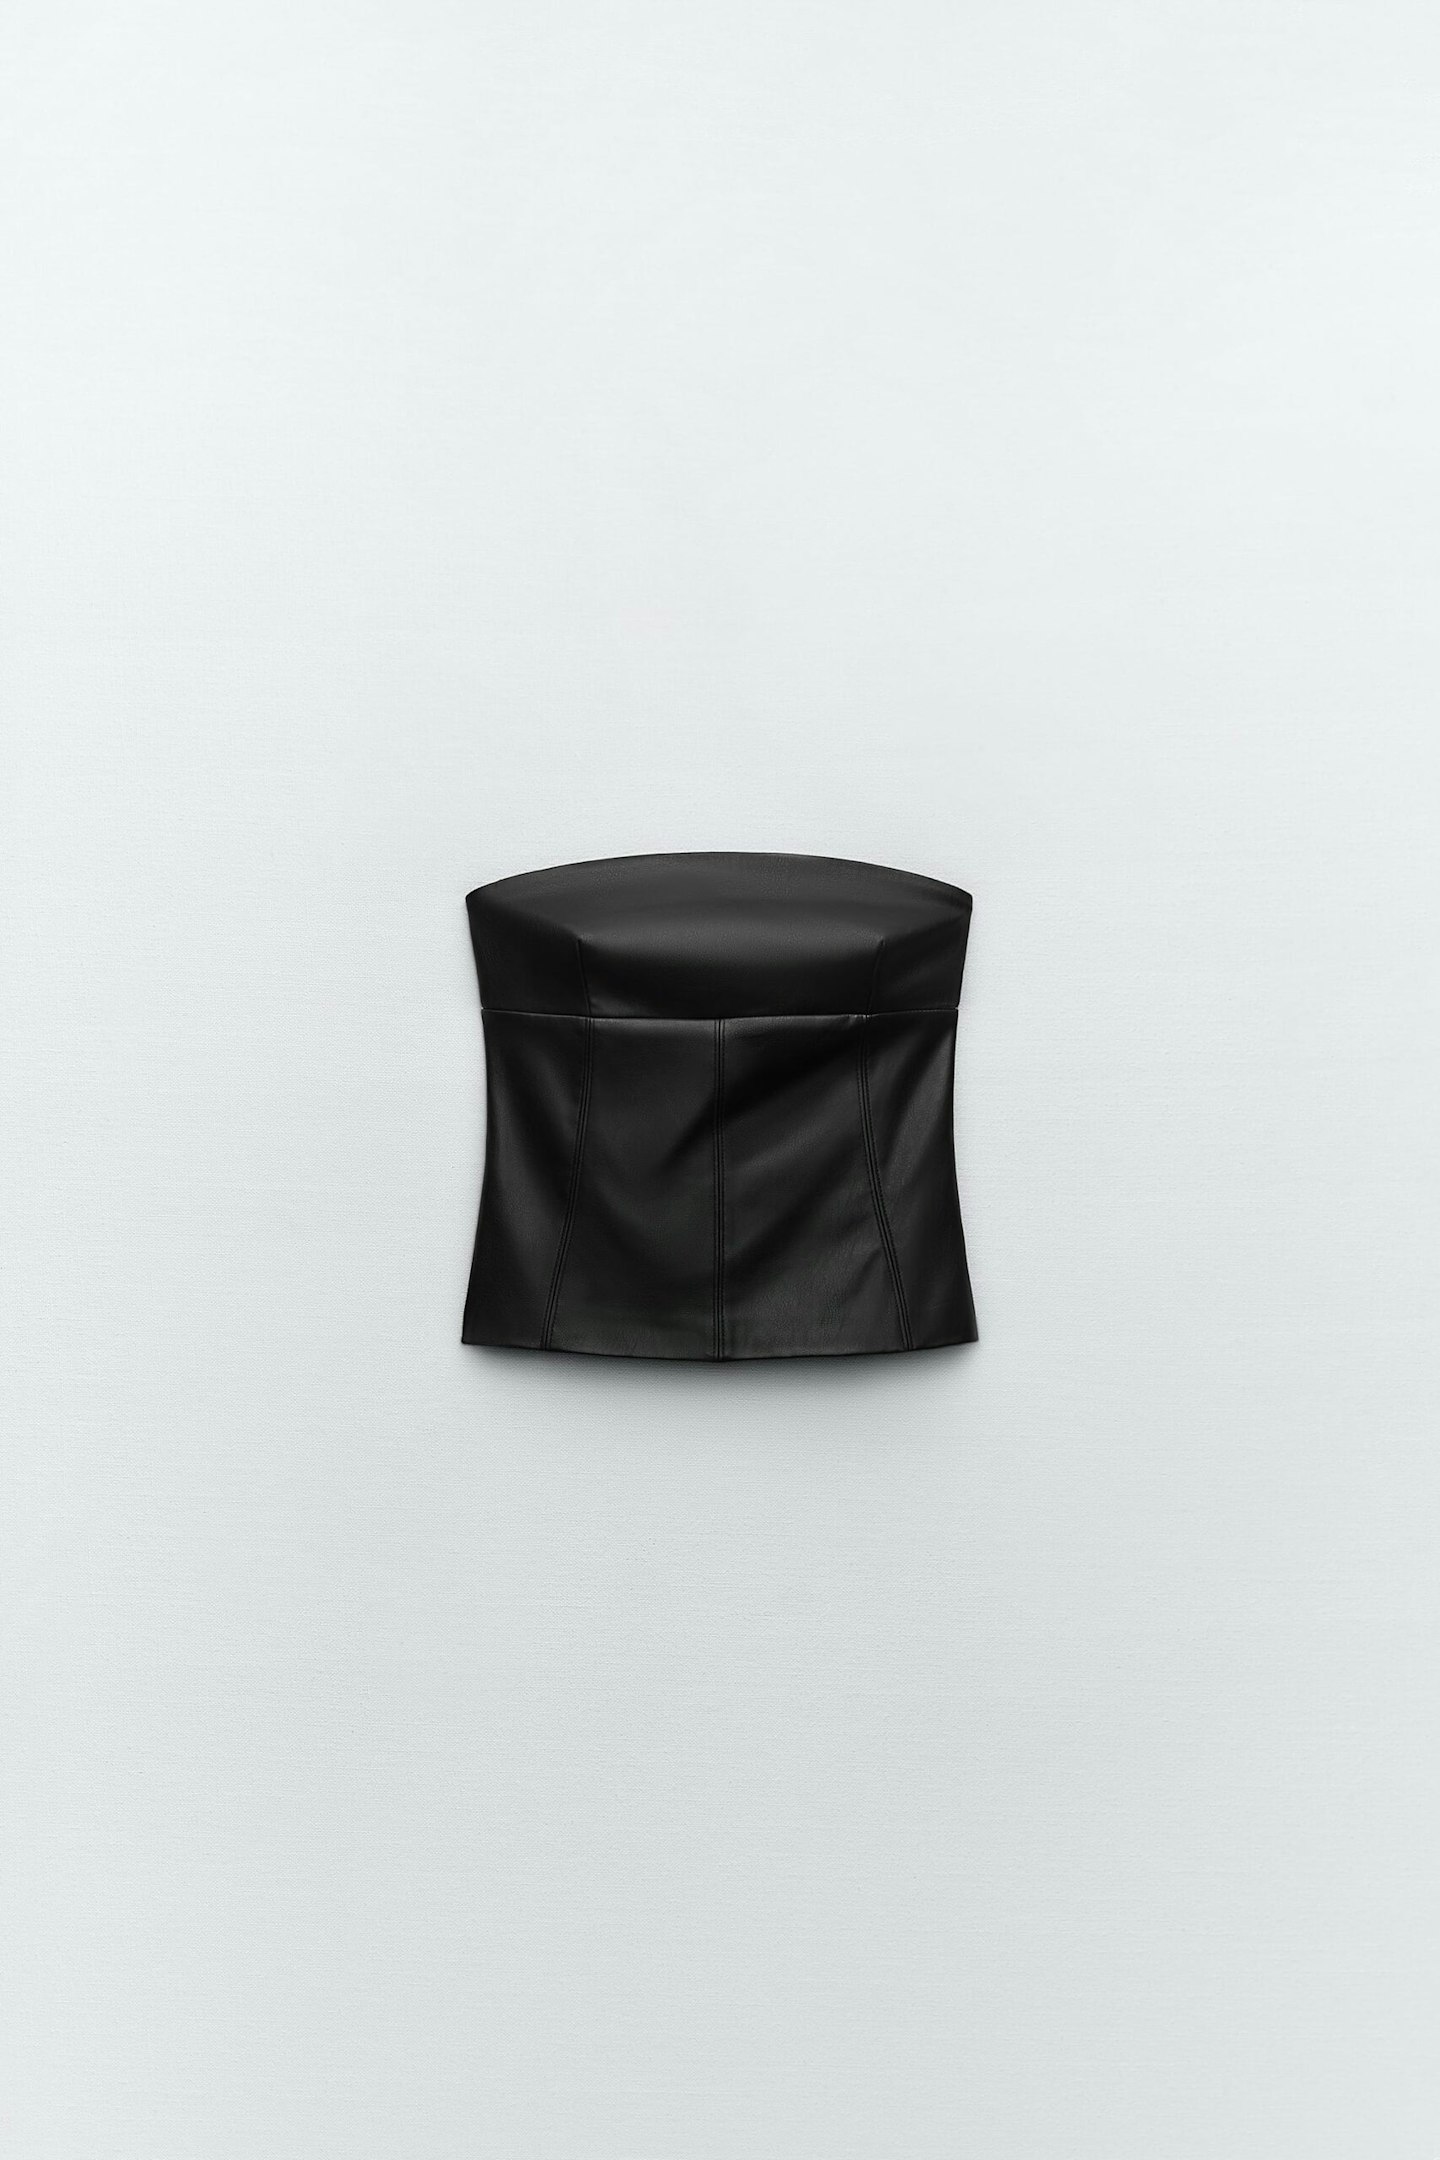 Zara, Leather Effect Strapless Top